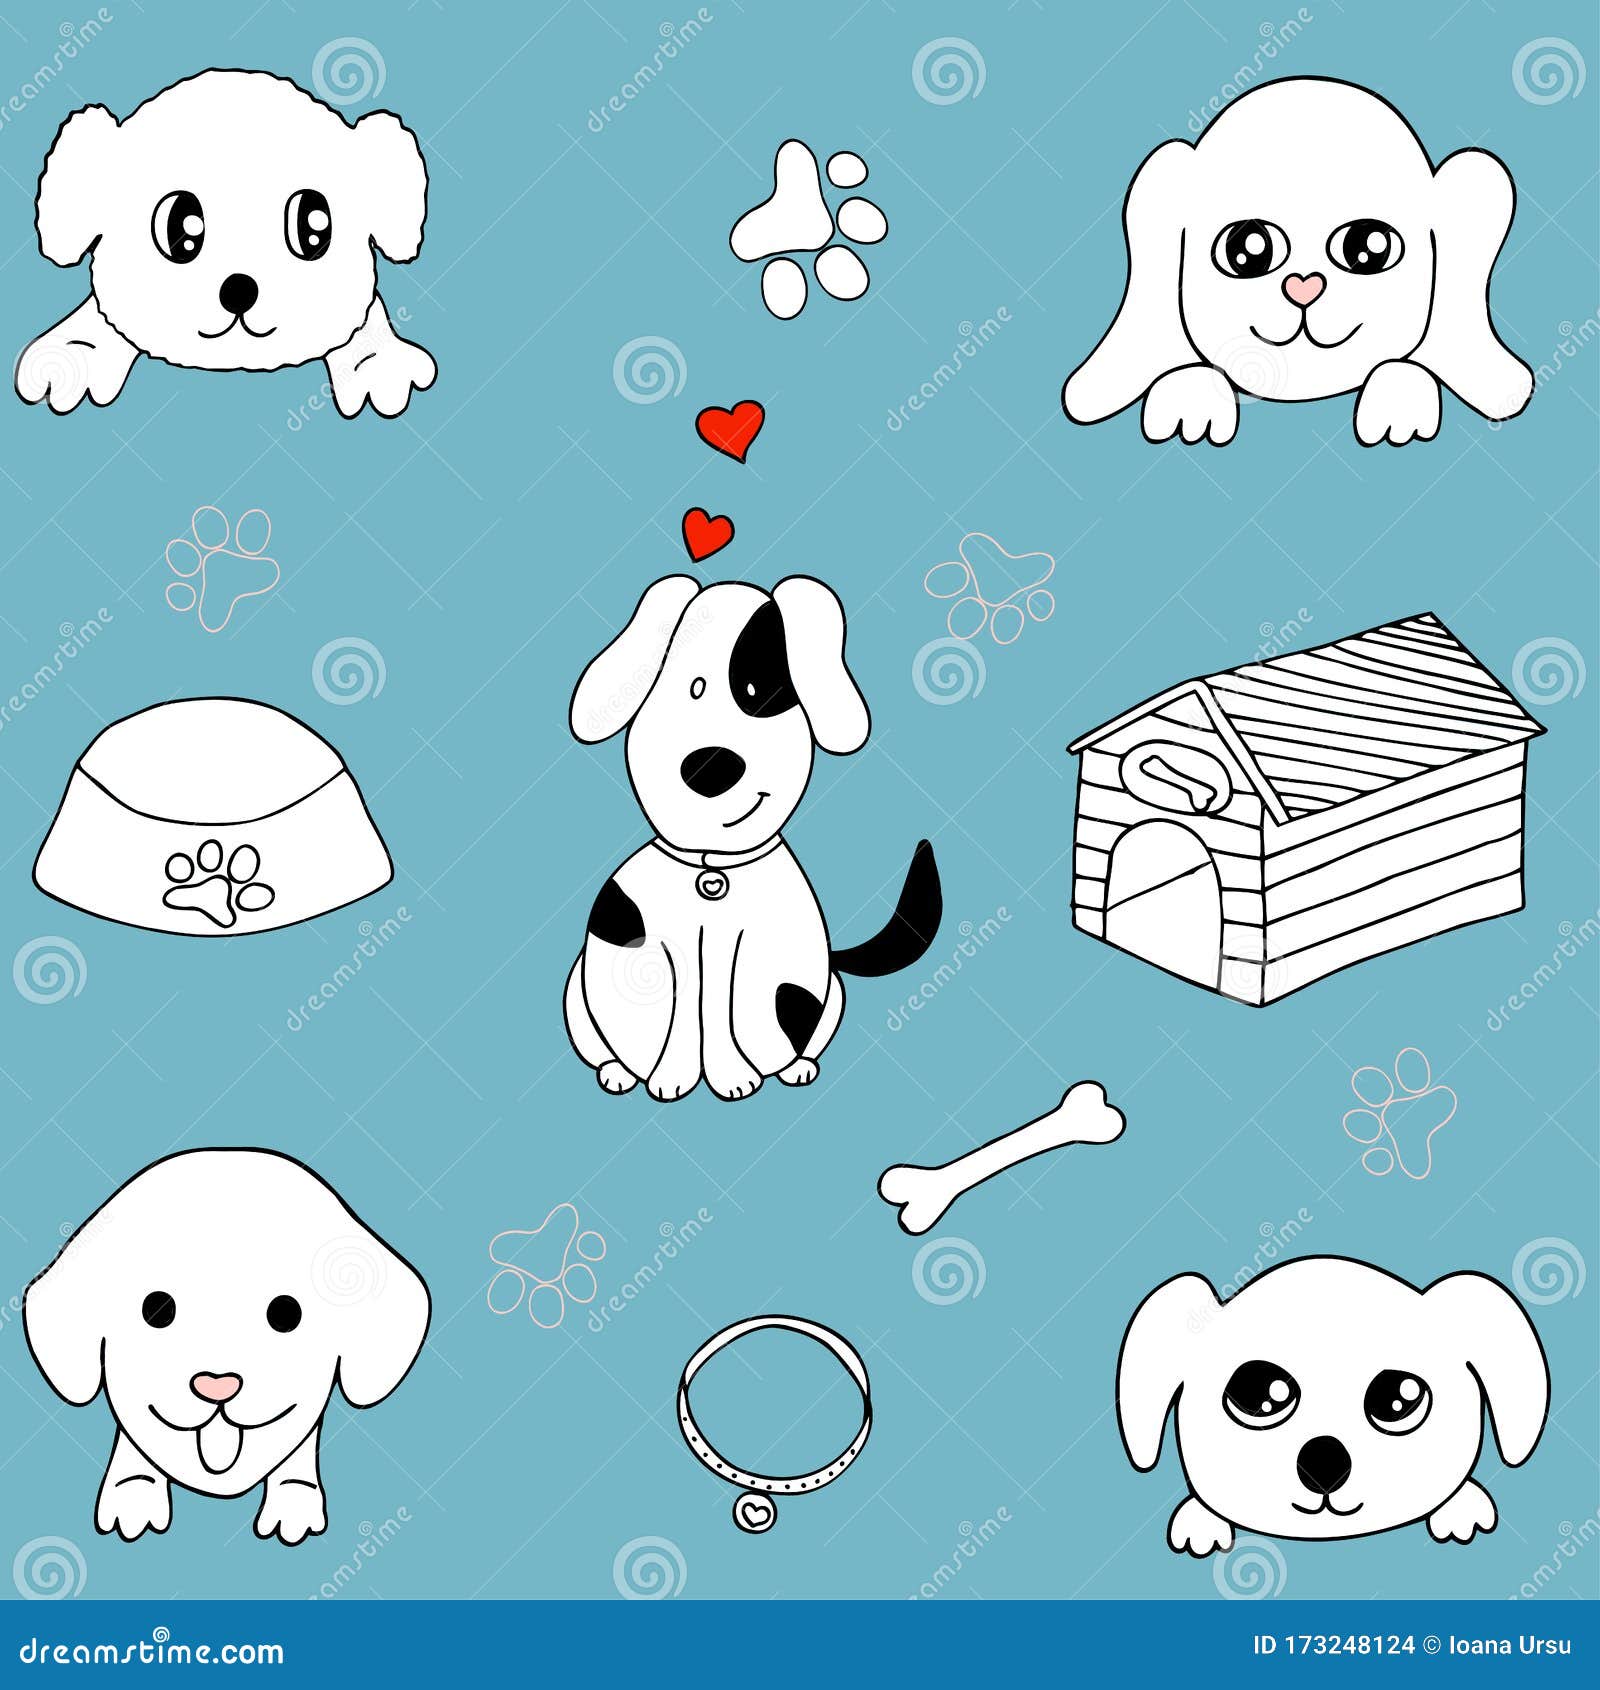 Cute and Simple Vector Illustration of Dogs and Puppy Doodle Icons, Hand  Drawn Cartoon Dogs Set Stock Vector - Illustration of design, cute:  173248124